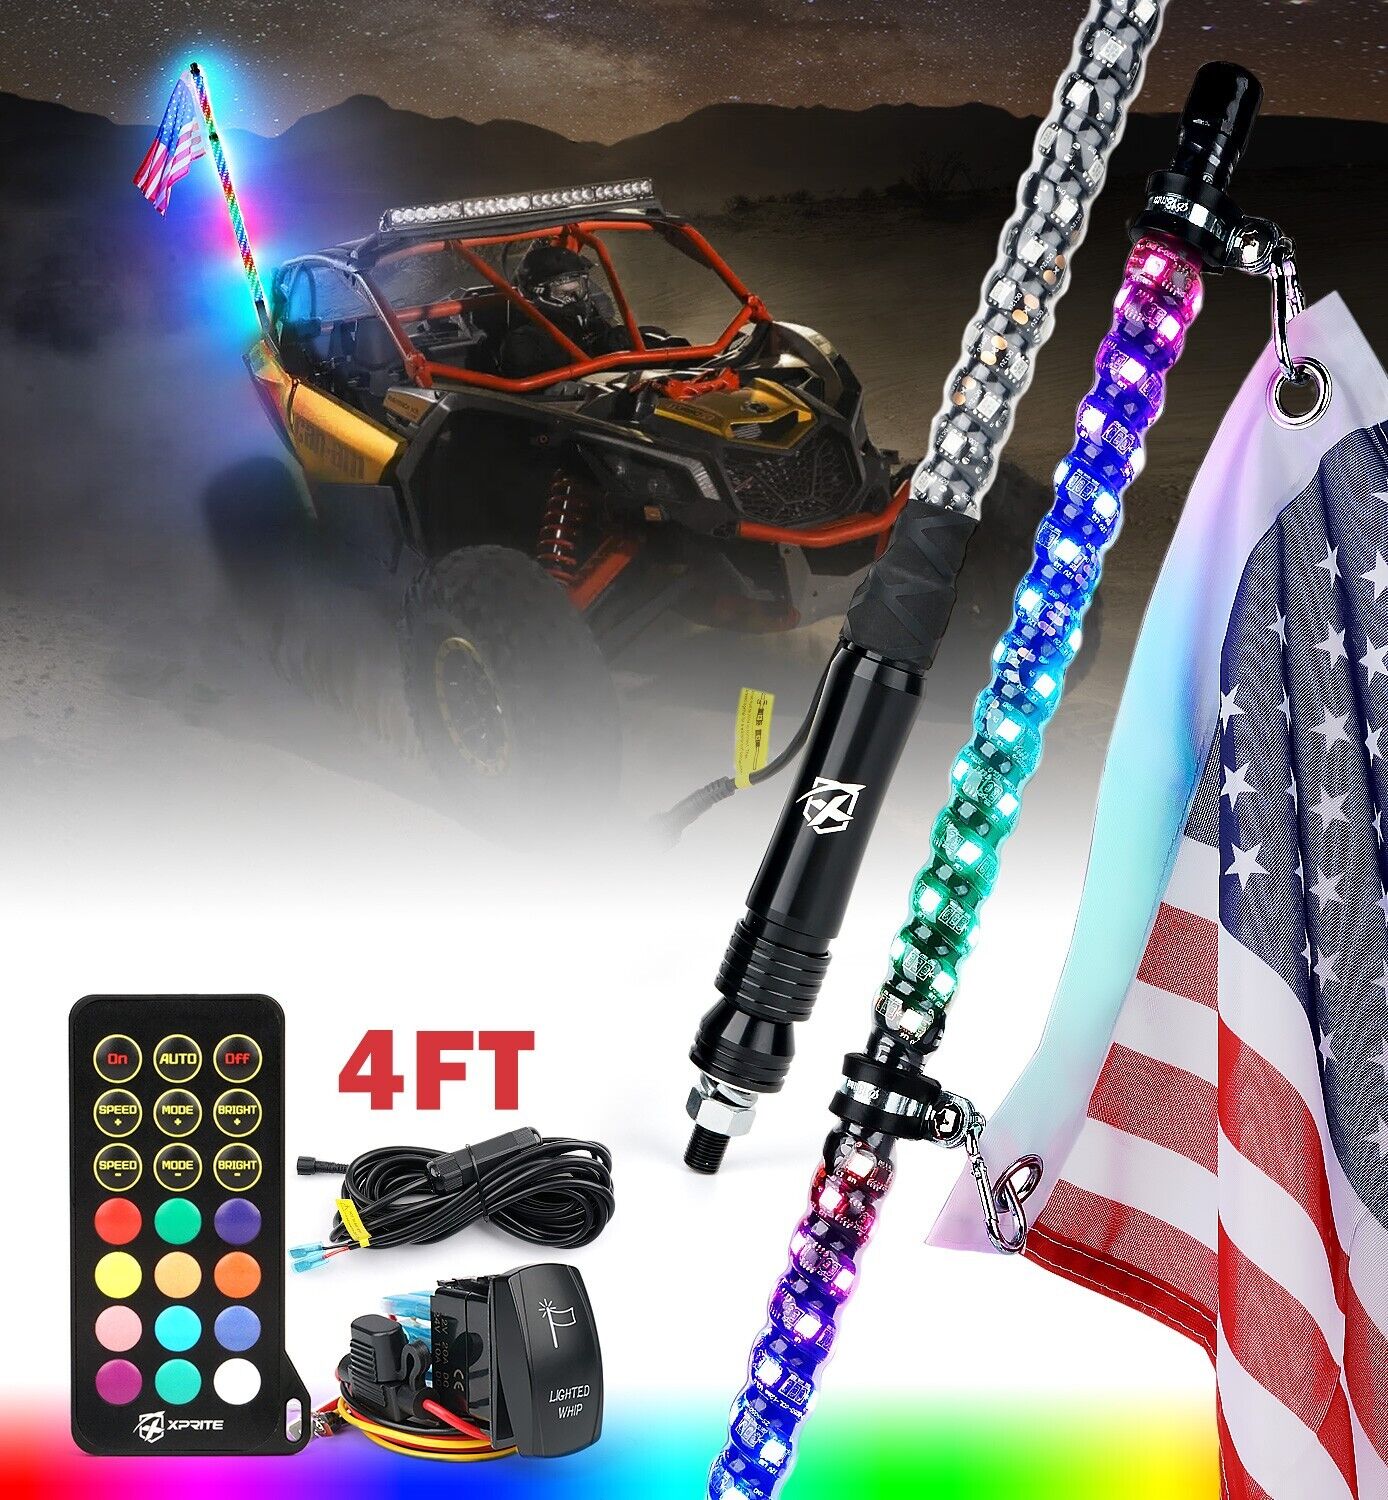 Xprite 4ft Spiral LED Lighted Whip Remote Dancing for UTV Polaris RZR Can-Am 4x4